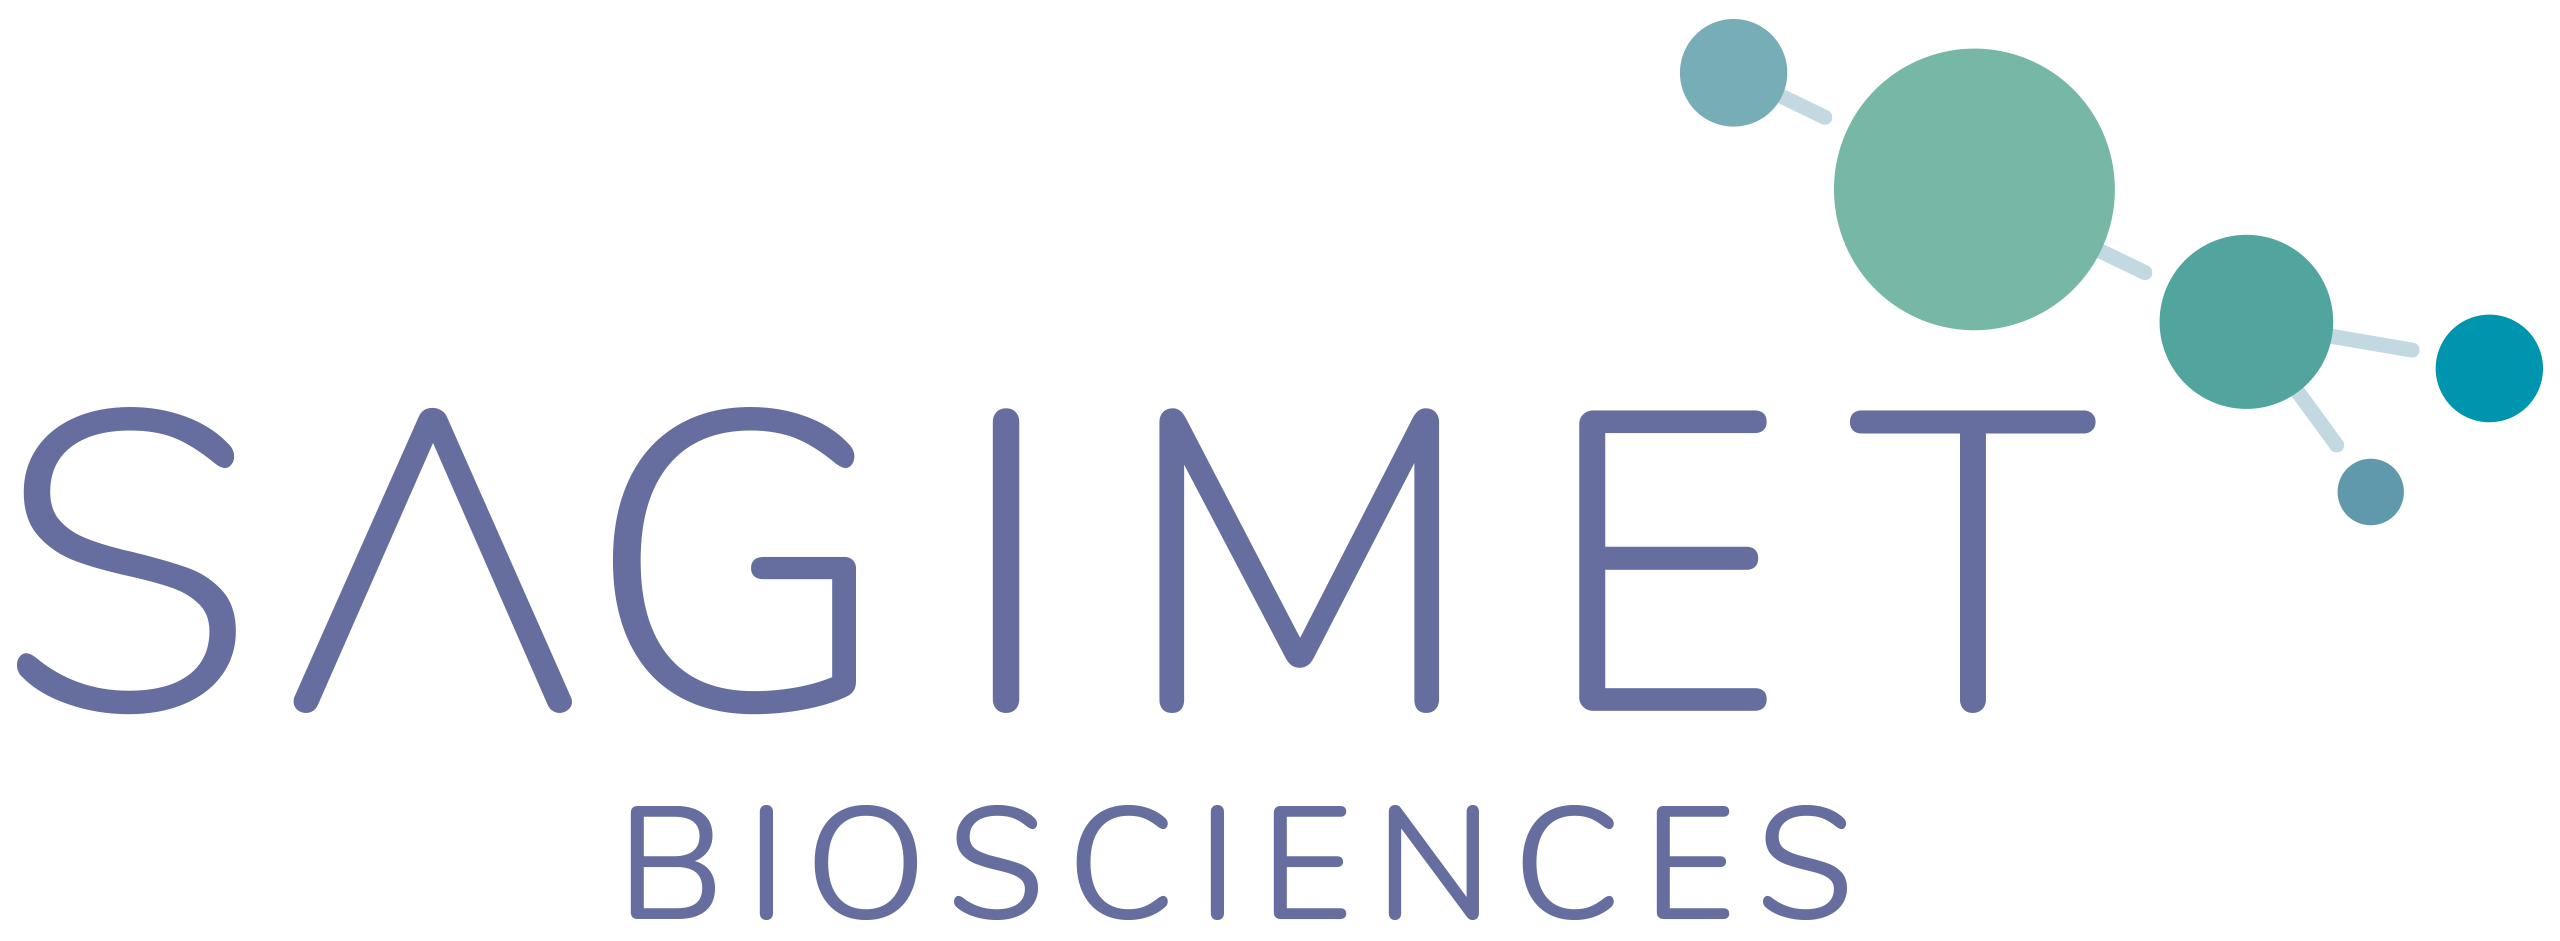 Sagimet Biosciences Reports Encouraging Results from Denifanstat Clinical Trial in Advanced Liver Disease